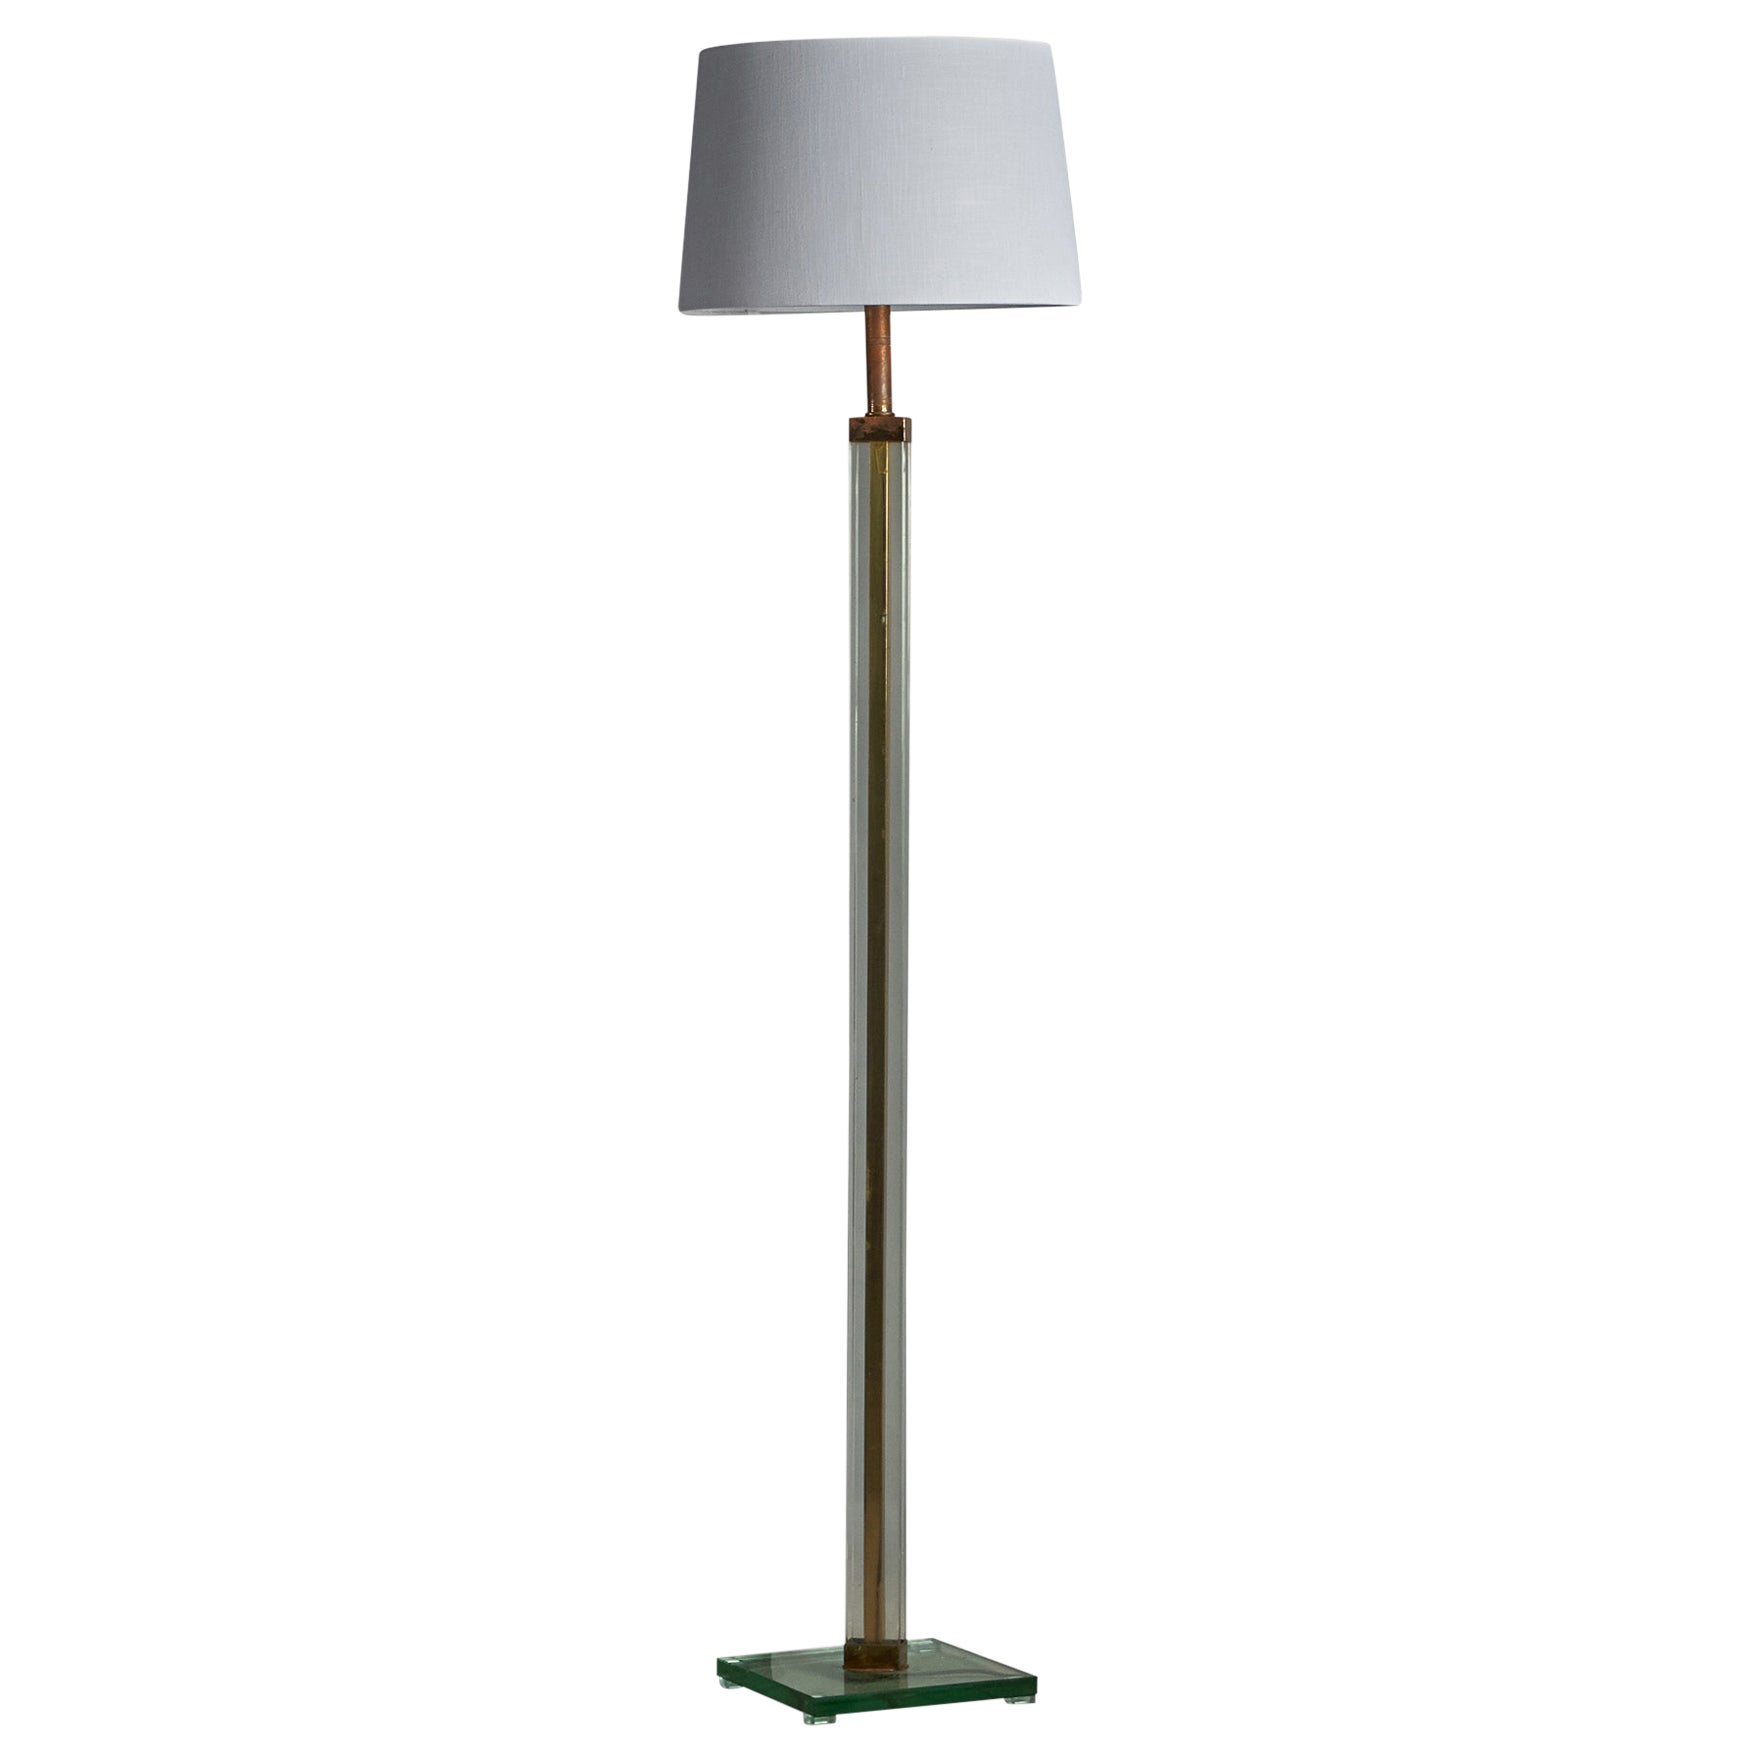 Pietro Chiesa, Floor Lamp, Brass, Glass, Fabric Italy, 1940s For Sale